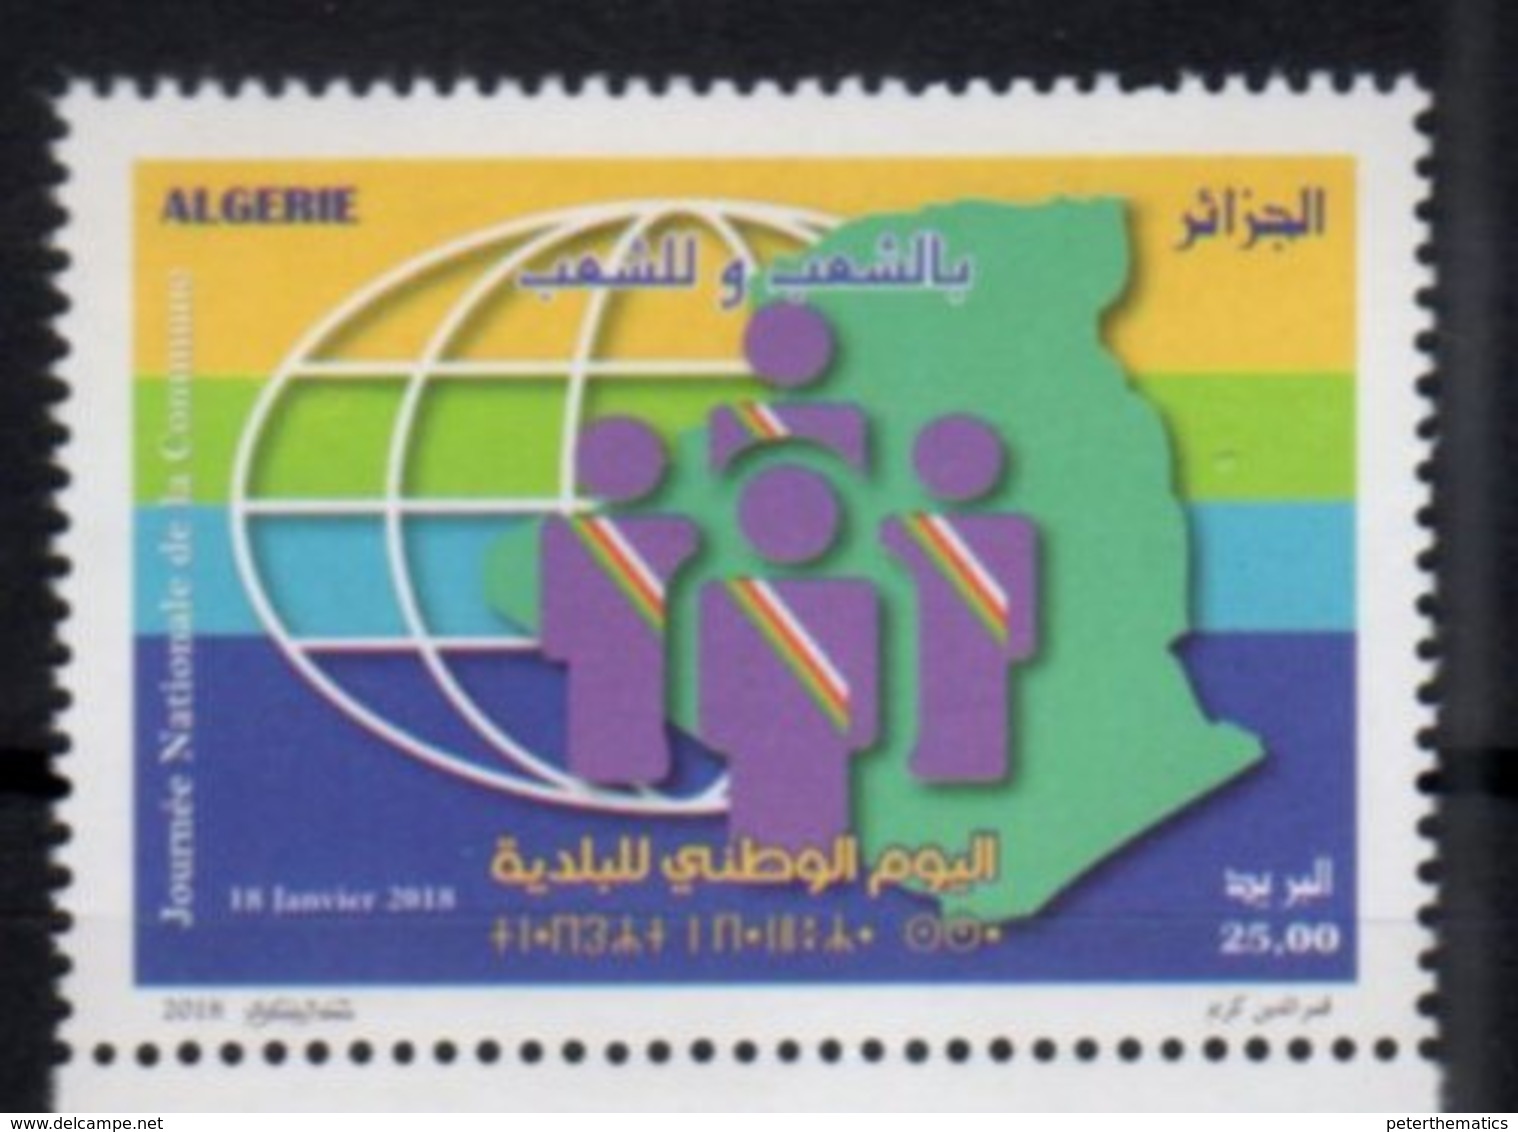 ALGERIA, 2018, MNH, NATIONAL DAY OF TOWNS, 1v - Unclassified